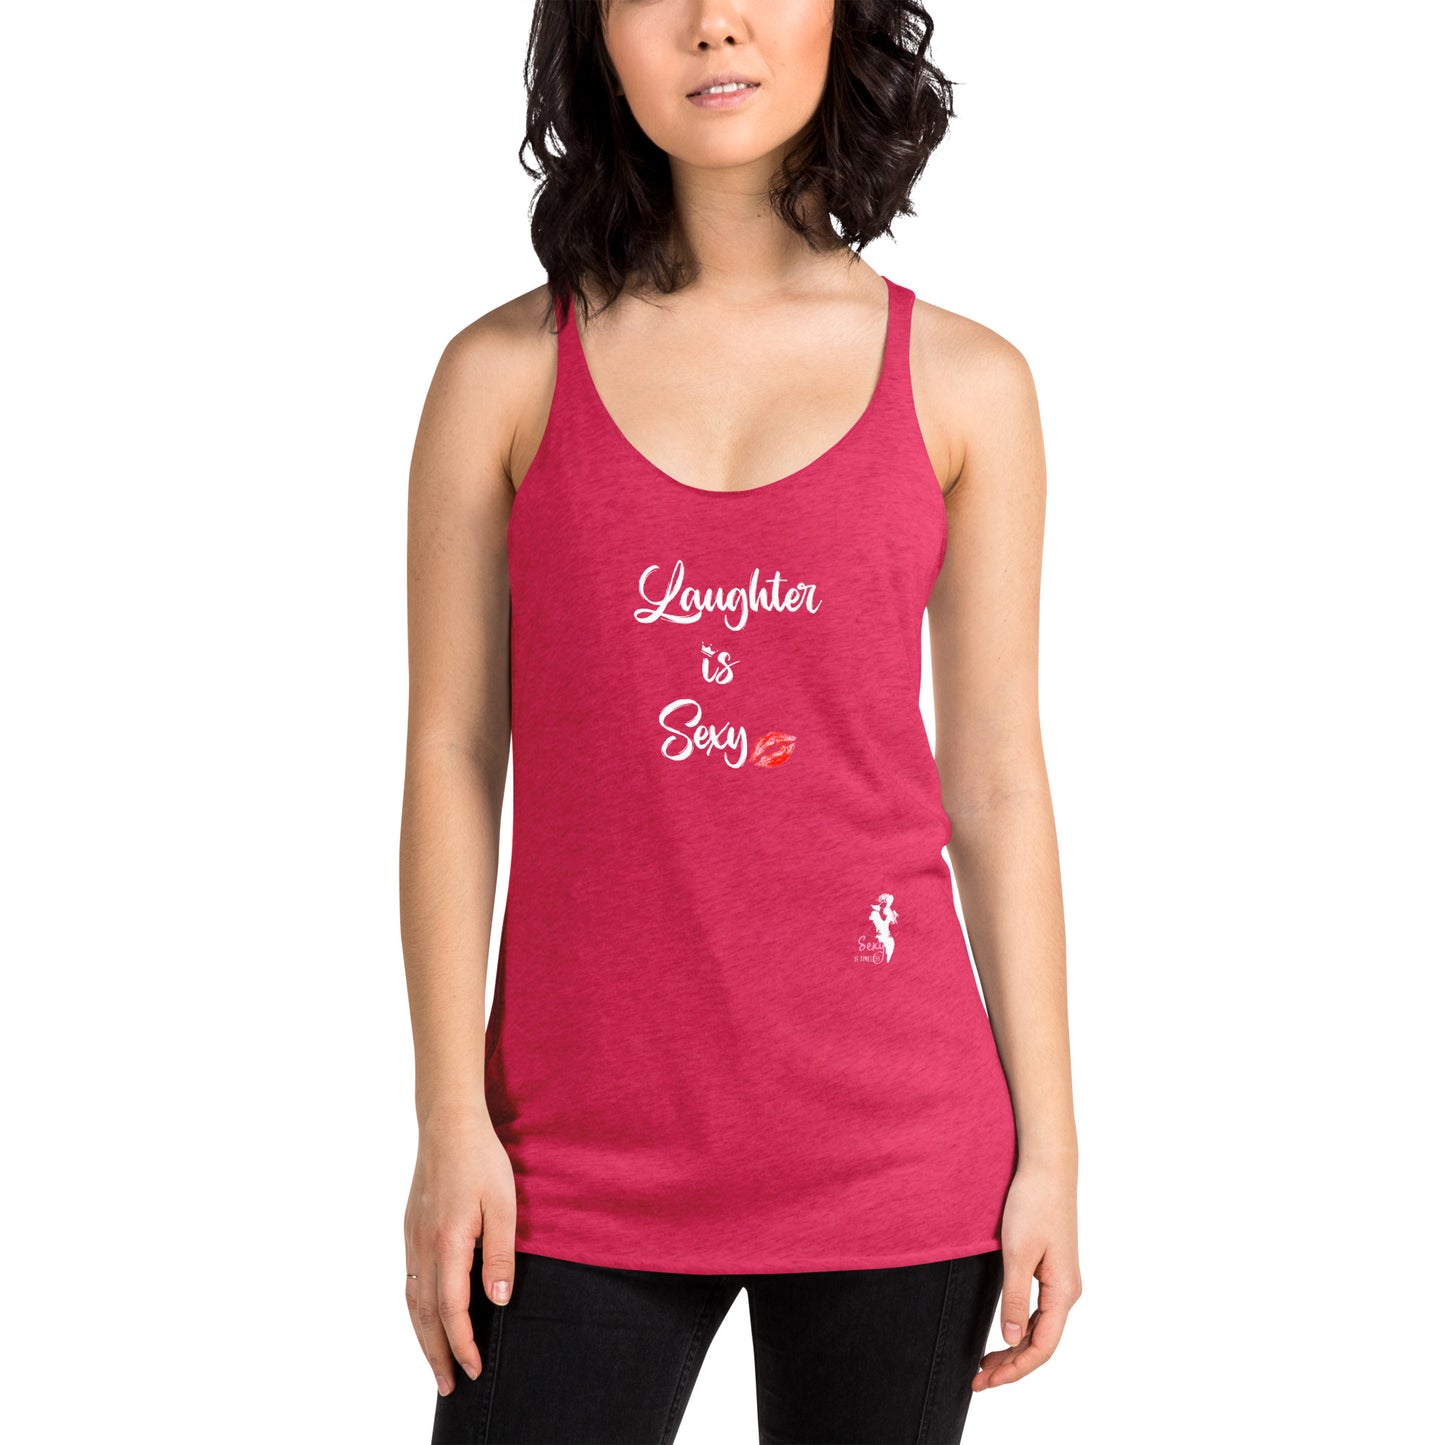 Women's Racerback Tank - Laughter is Sexy - Colors